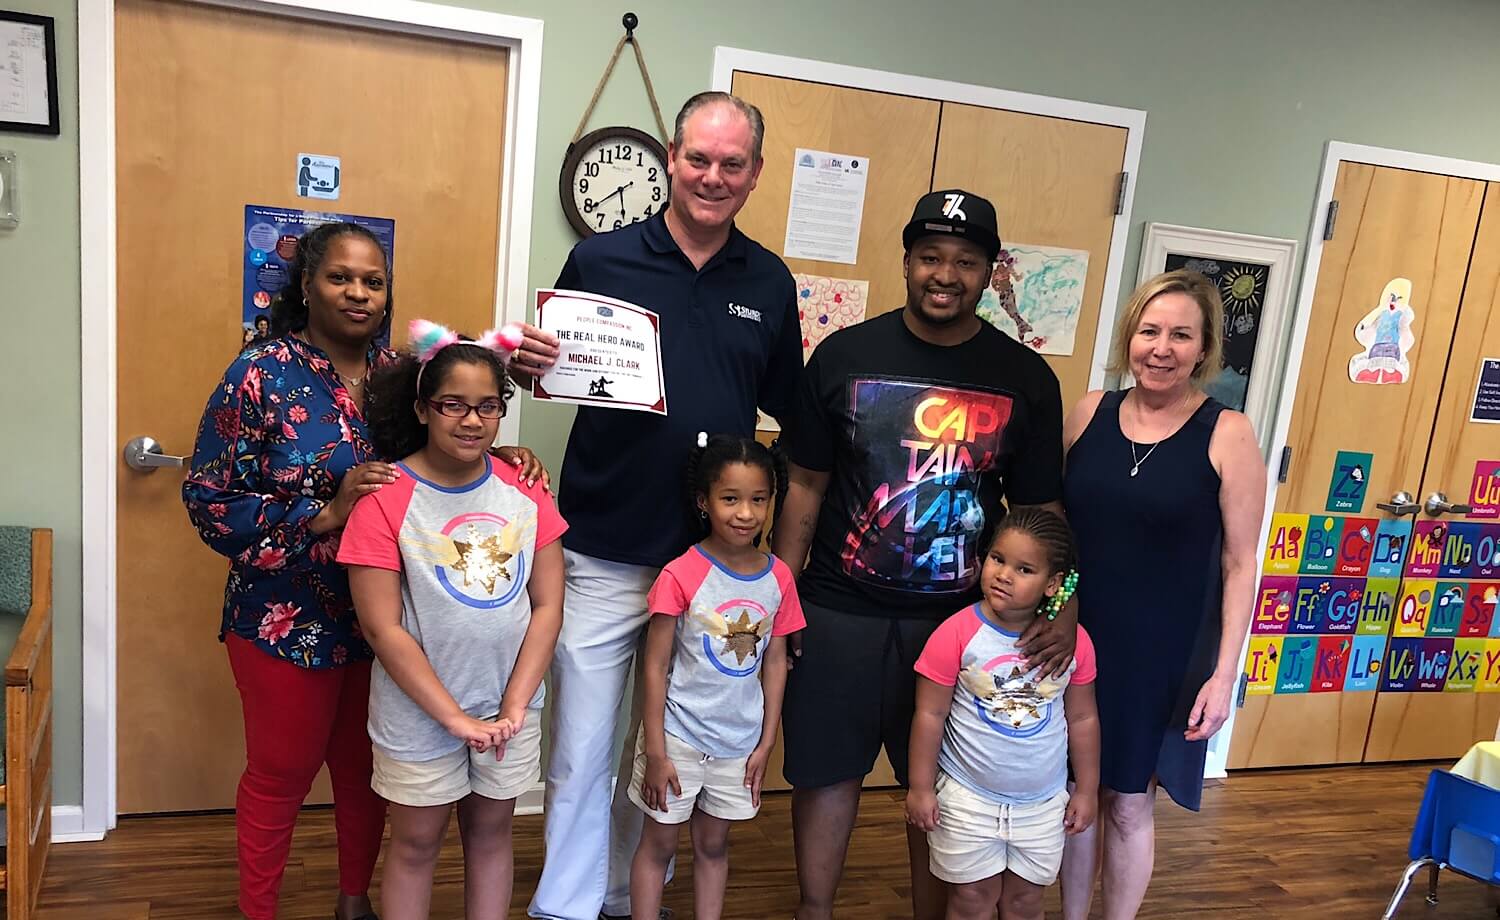 Middle Township Committeeman and former mayor Michael Clark holds hero award for public service presented by Alexander Bland during an event held at the Shore Family Success Center in Rio Grande.  